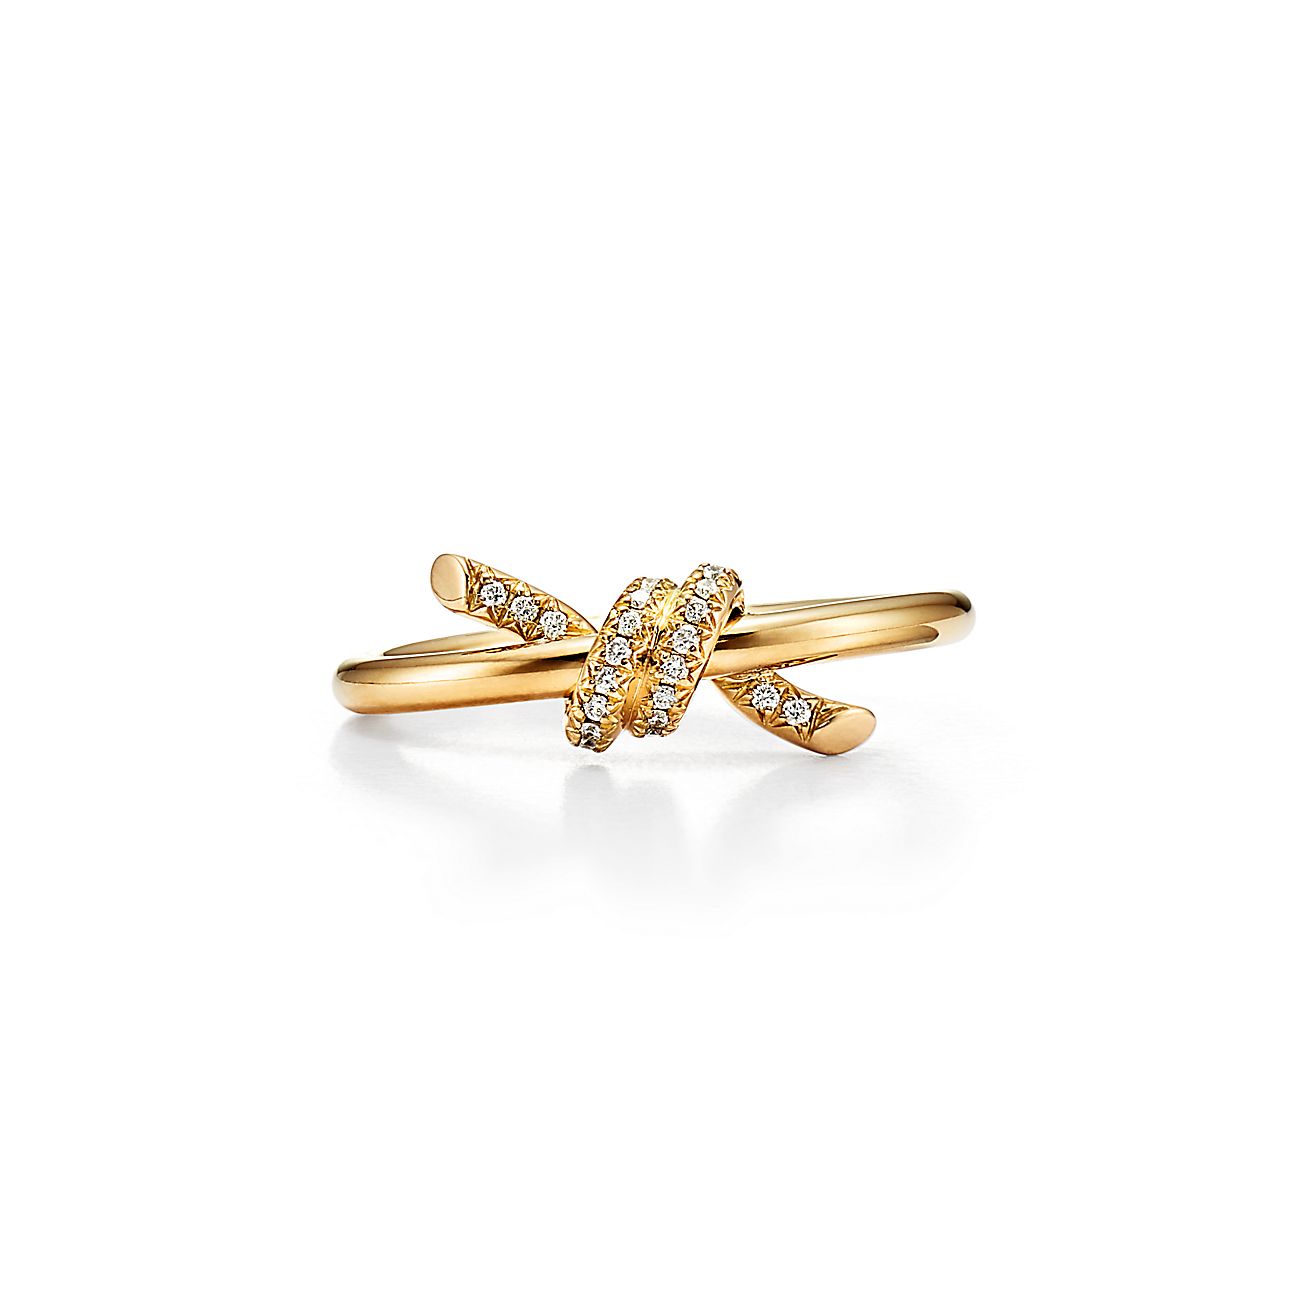 Tiffany KnotRing in Yellow Gold with Diamonds